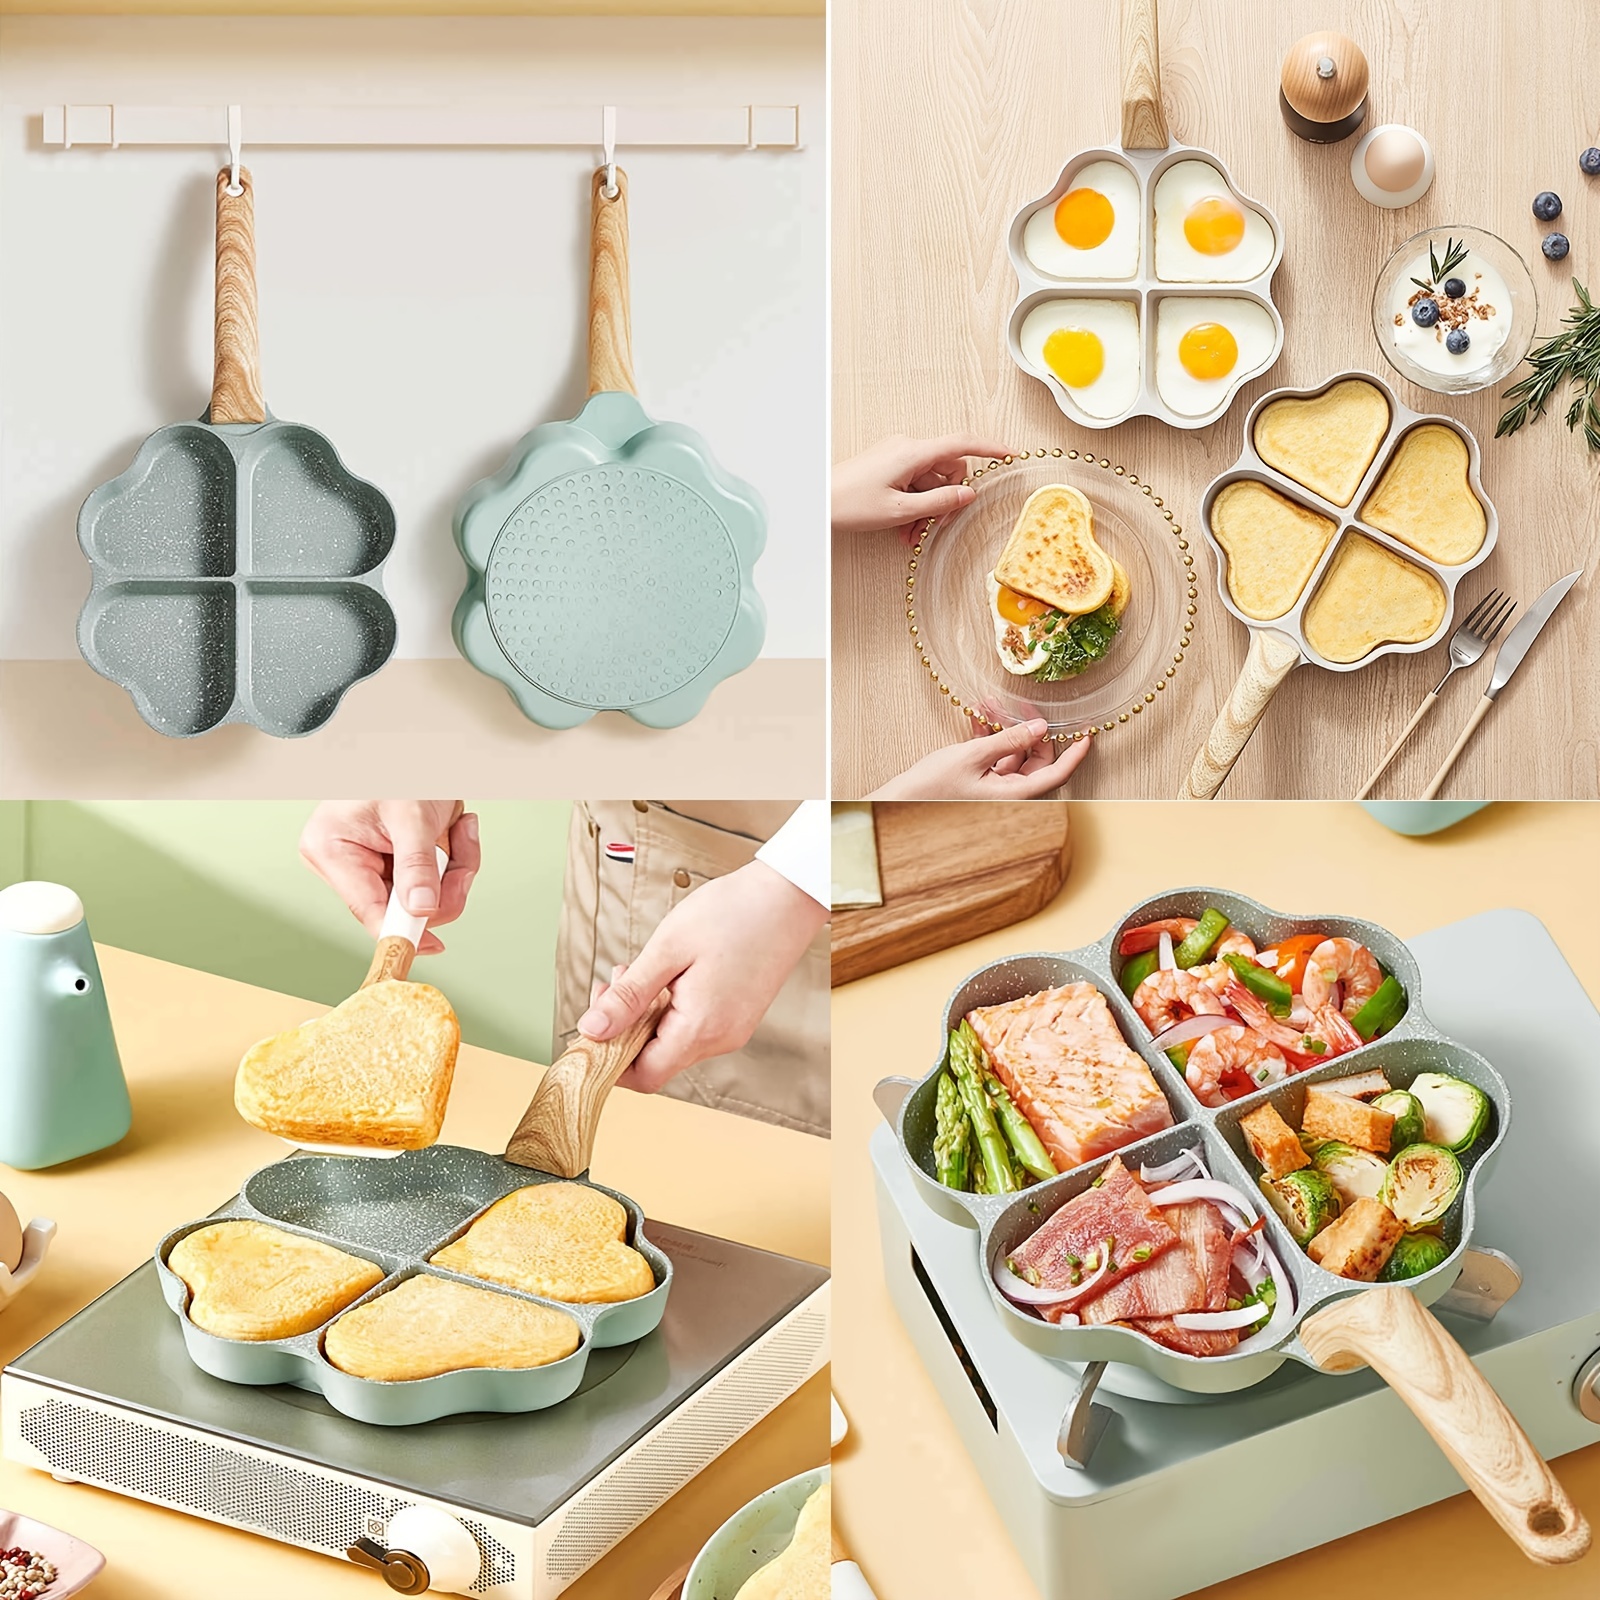 1pc Fry Pan For Egg, Non Stick Ham Pancake Maker, Egg Burger Pan With  Wooden Handle, 4 Holes, For Induction Cooker Gas Stove